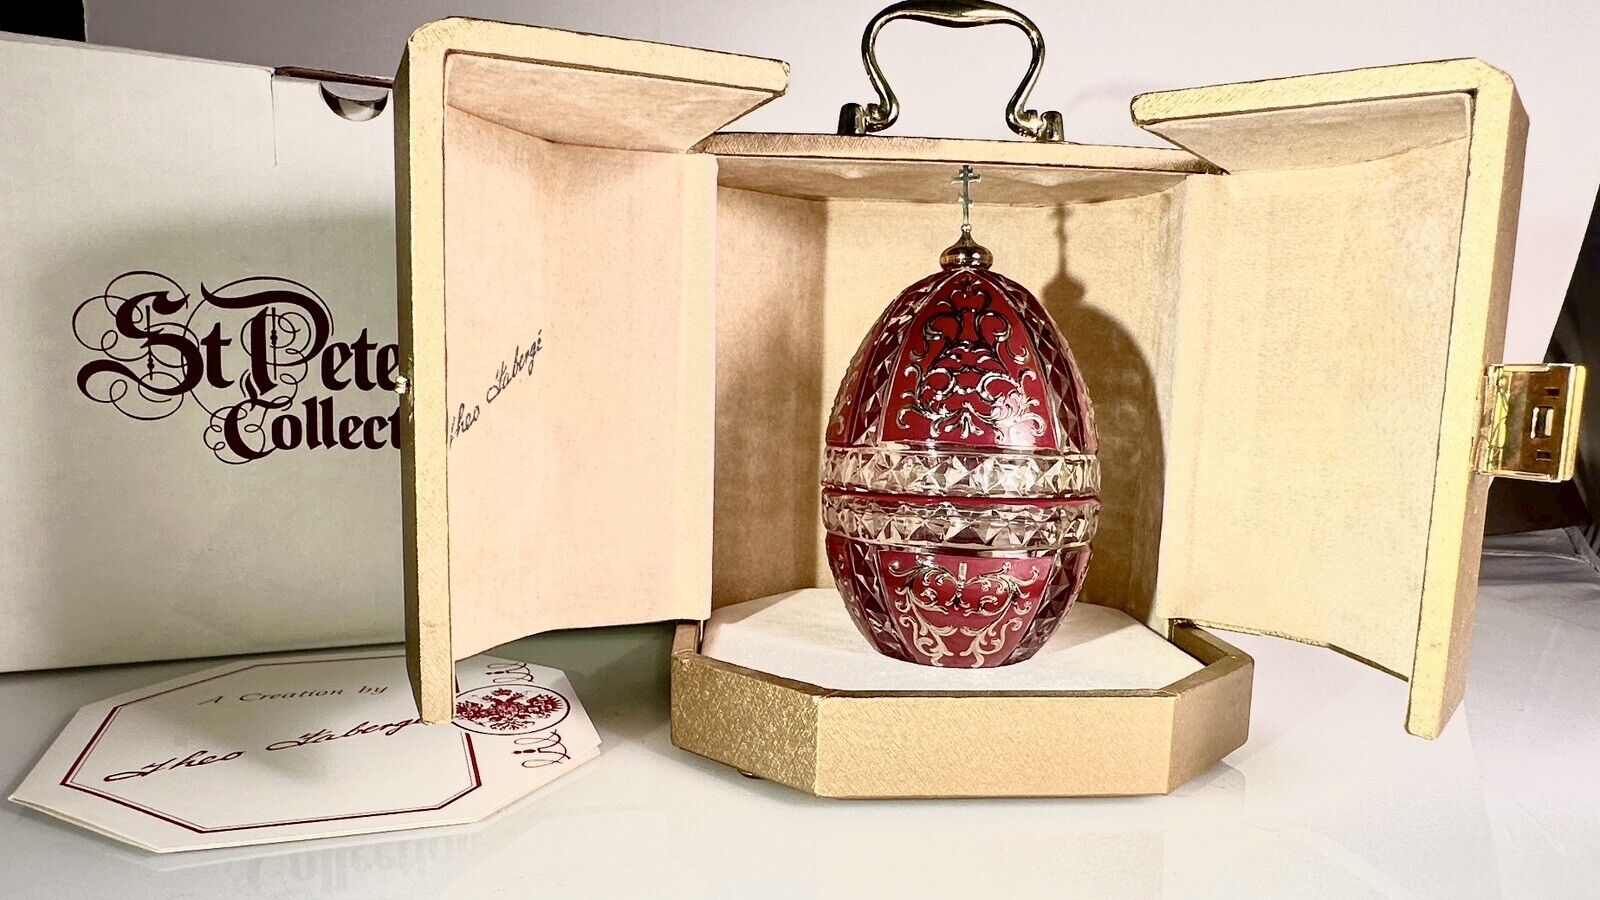 RARE THEO FABERGE ST. VLADIMIR EGG FROM THE ST.PETERSBURG COLLECTION #169 of 500